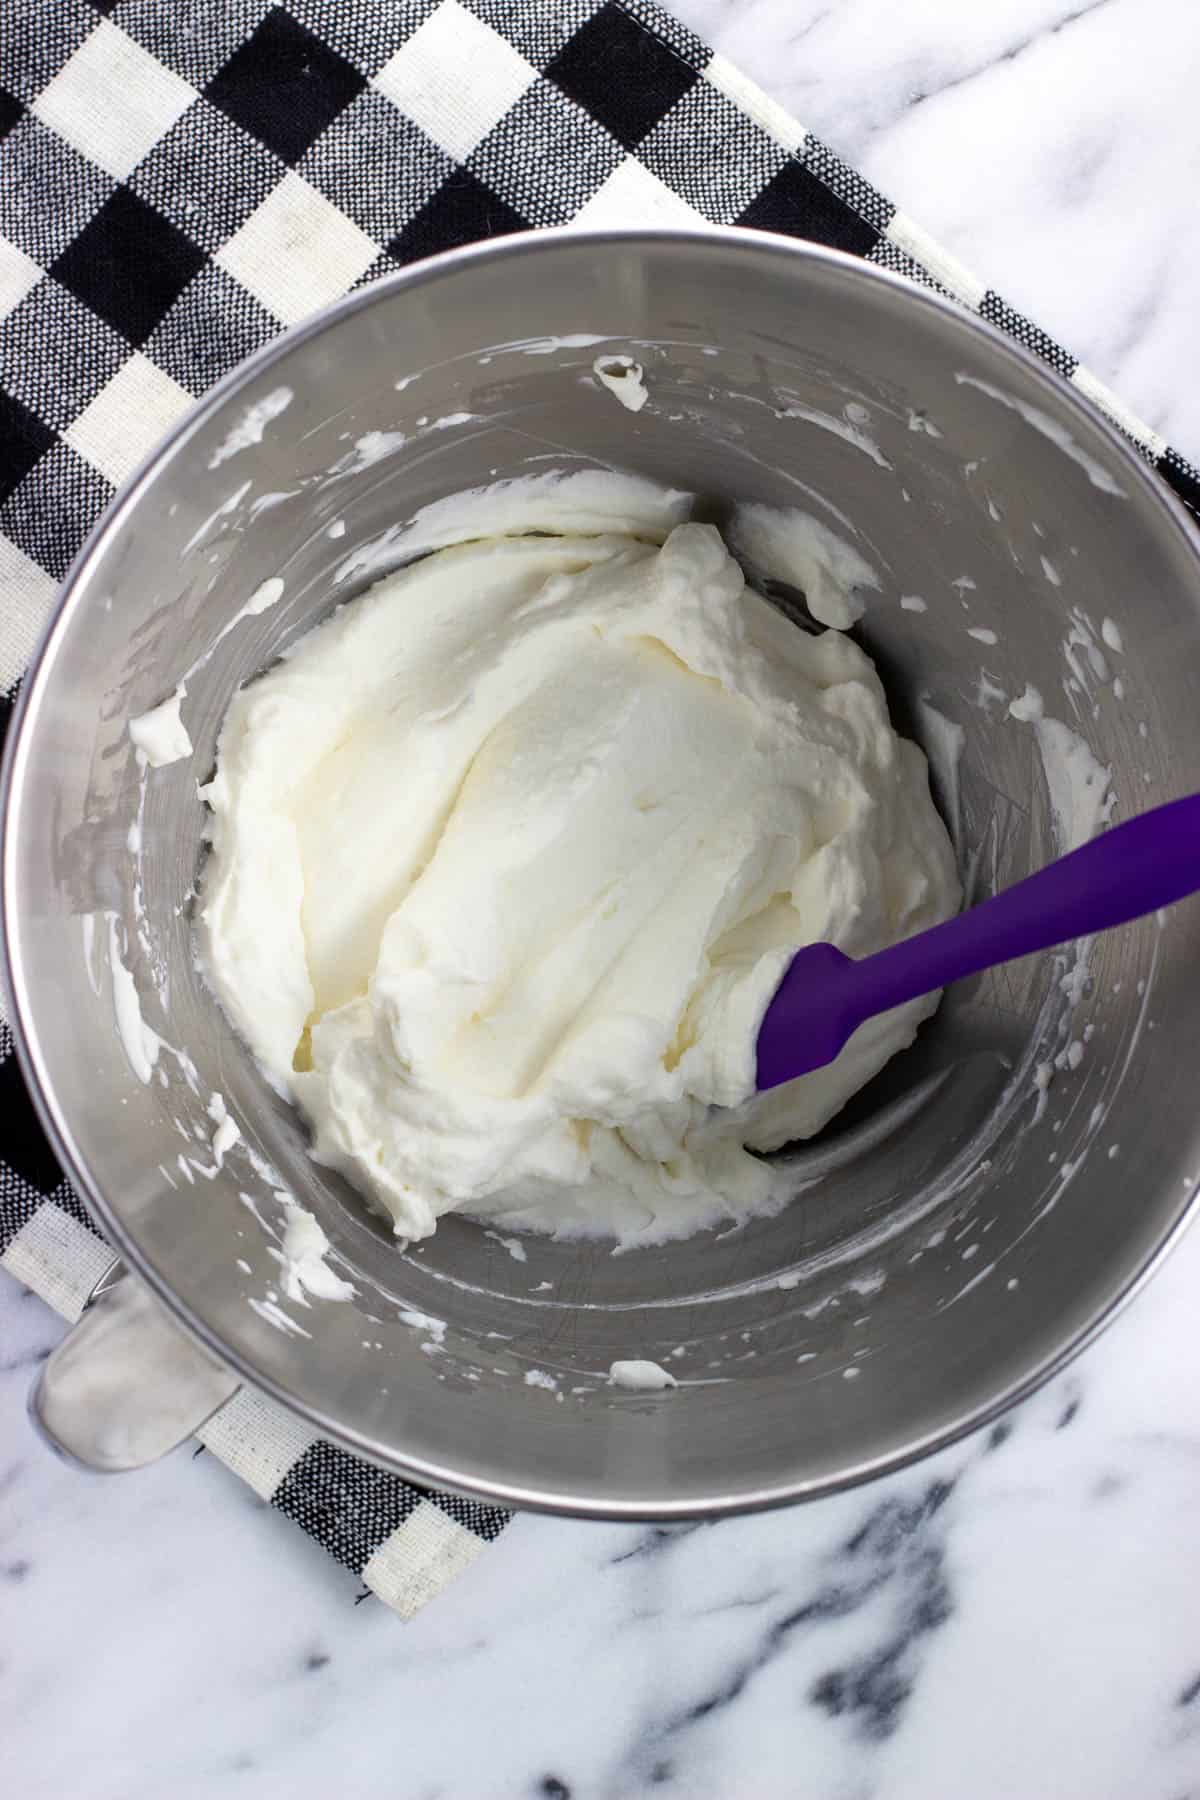 Fluffy stabilized whipped cream in a metal stand mixer bowl.